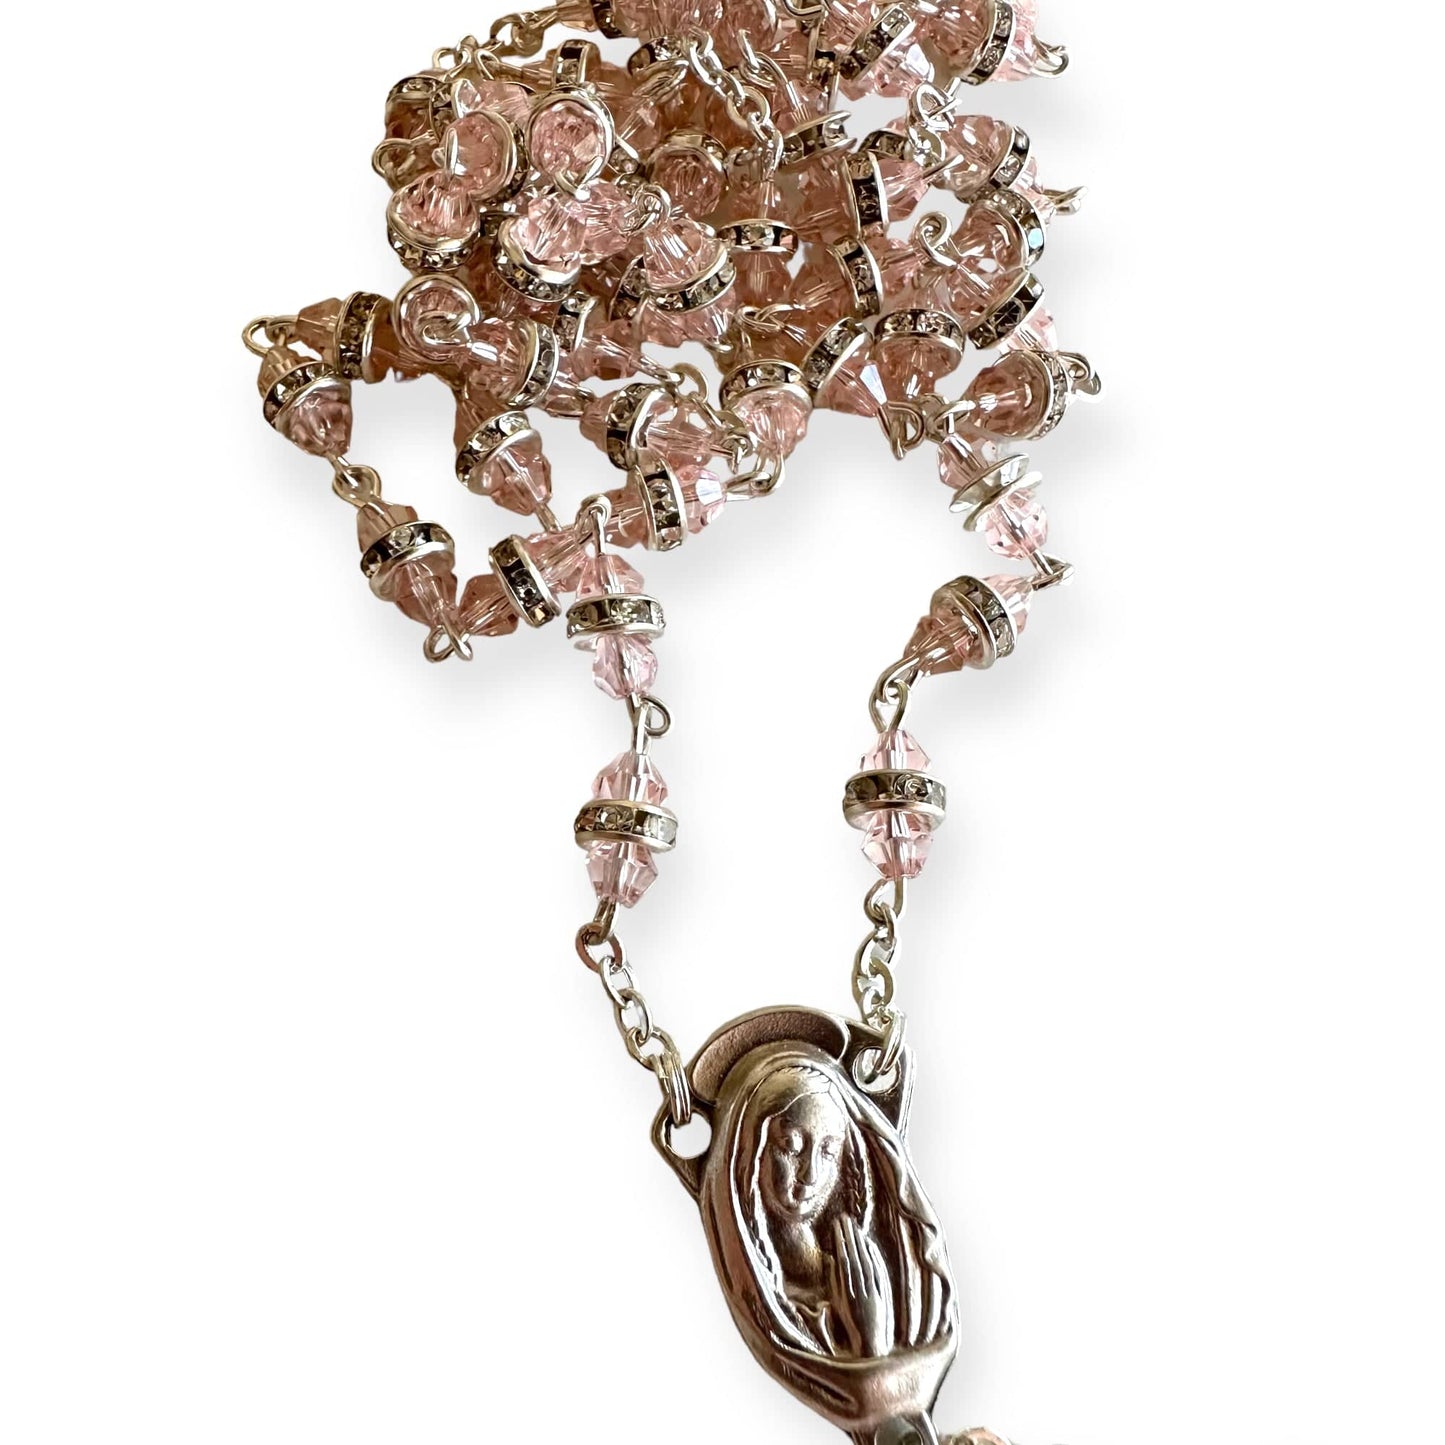 Catholically Rosaries Blessed Virgin Mary - Pink Shiny Crystal Rosary - Rhinestone - Blessed By Pope